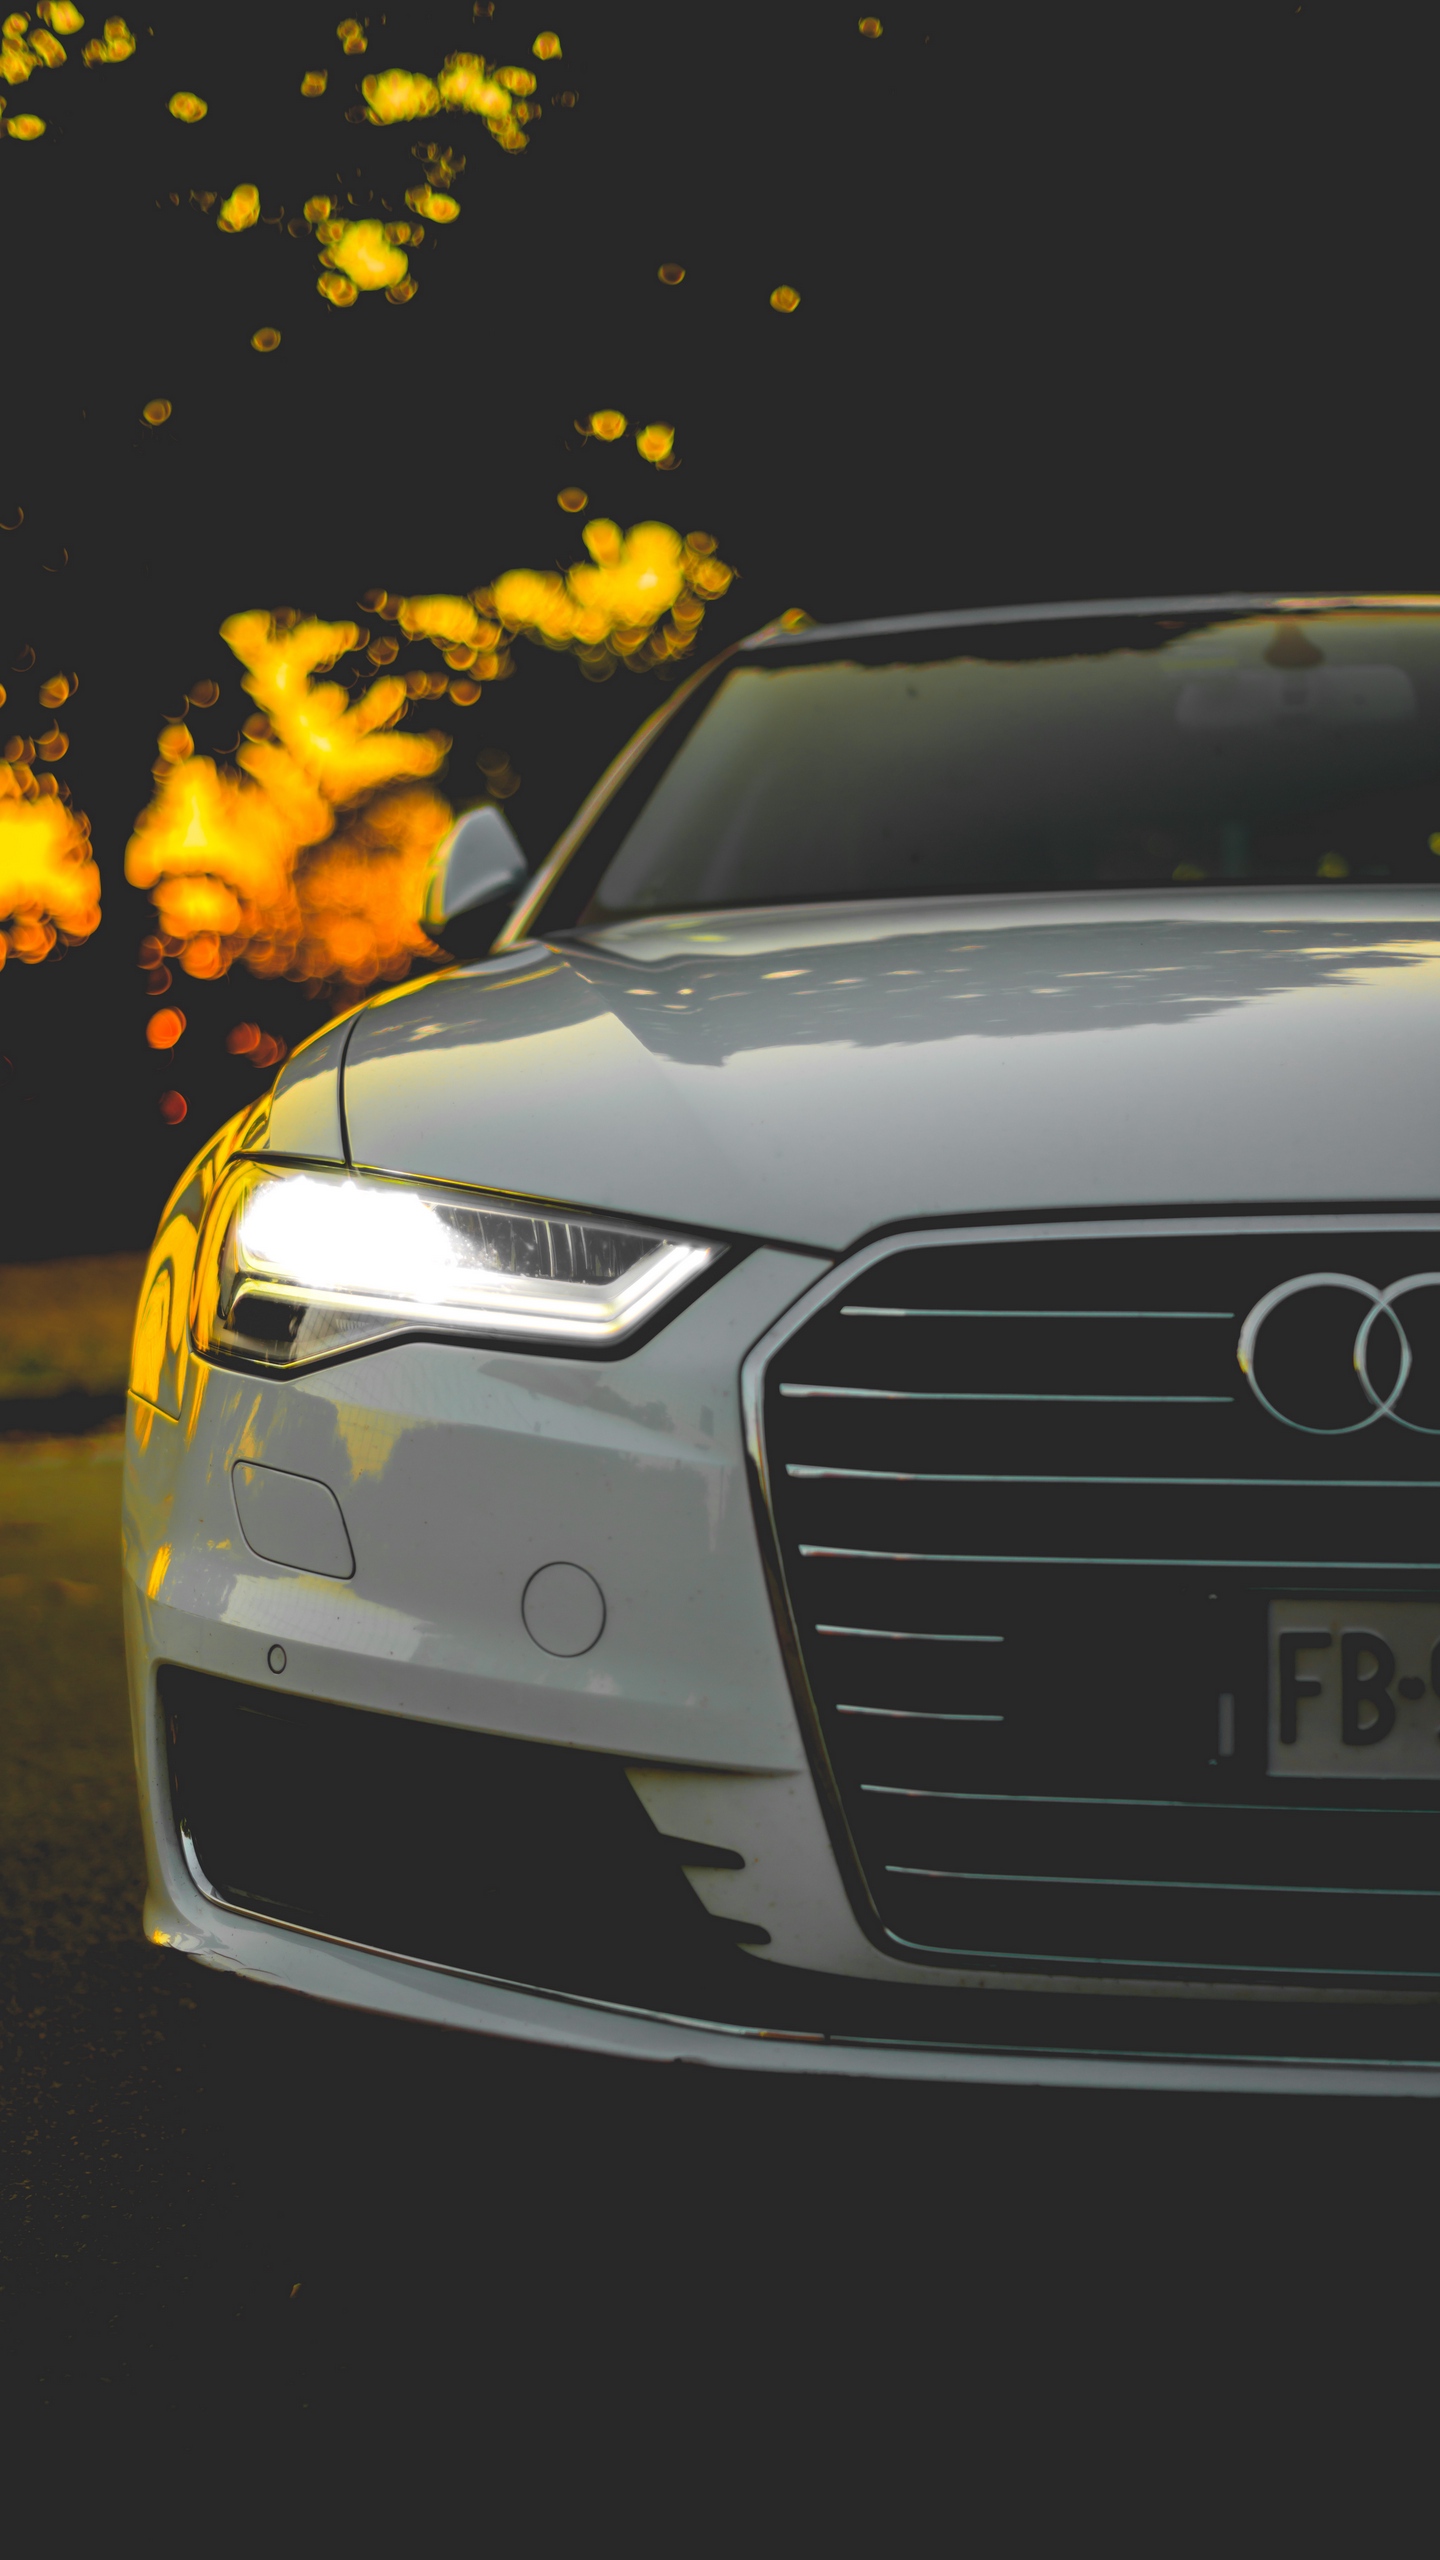 Wallpaper Auto, Front View, Motion Blur - Cars 4k Wallpapers For Android - 1440x2560  Wallpaper 